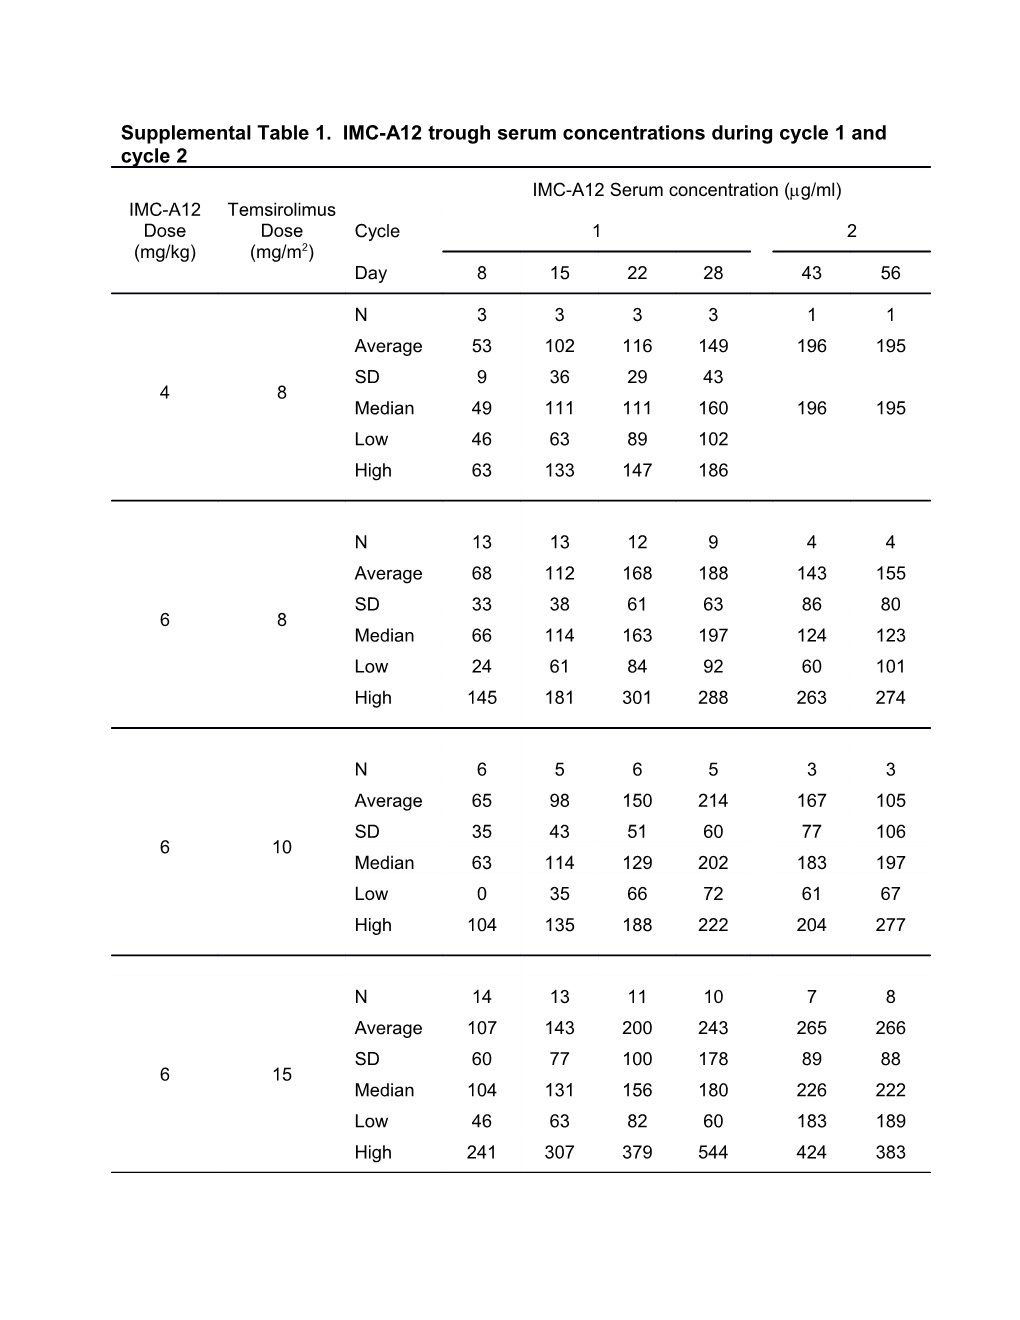 Supplemental Table 1. IMC-A12 Trough Serum Concentrations During Cycle 1 and Cycle 2